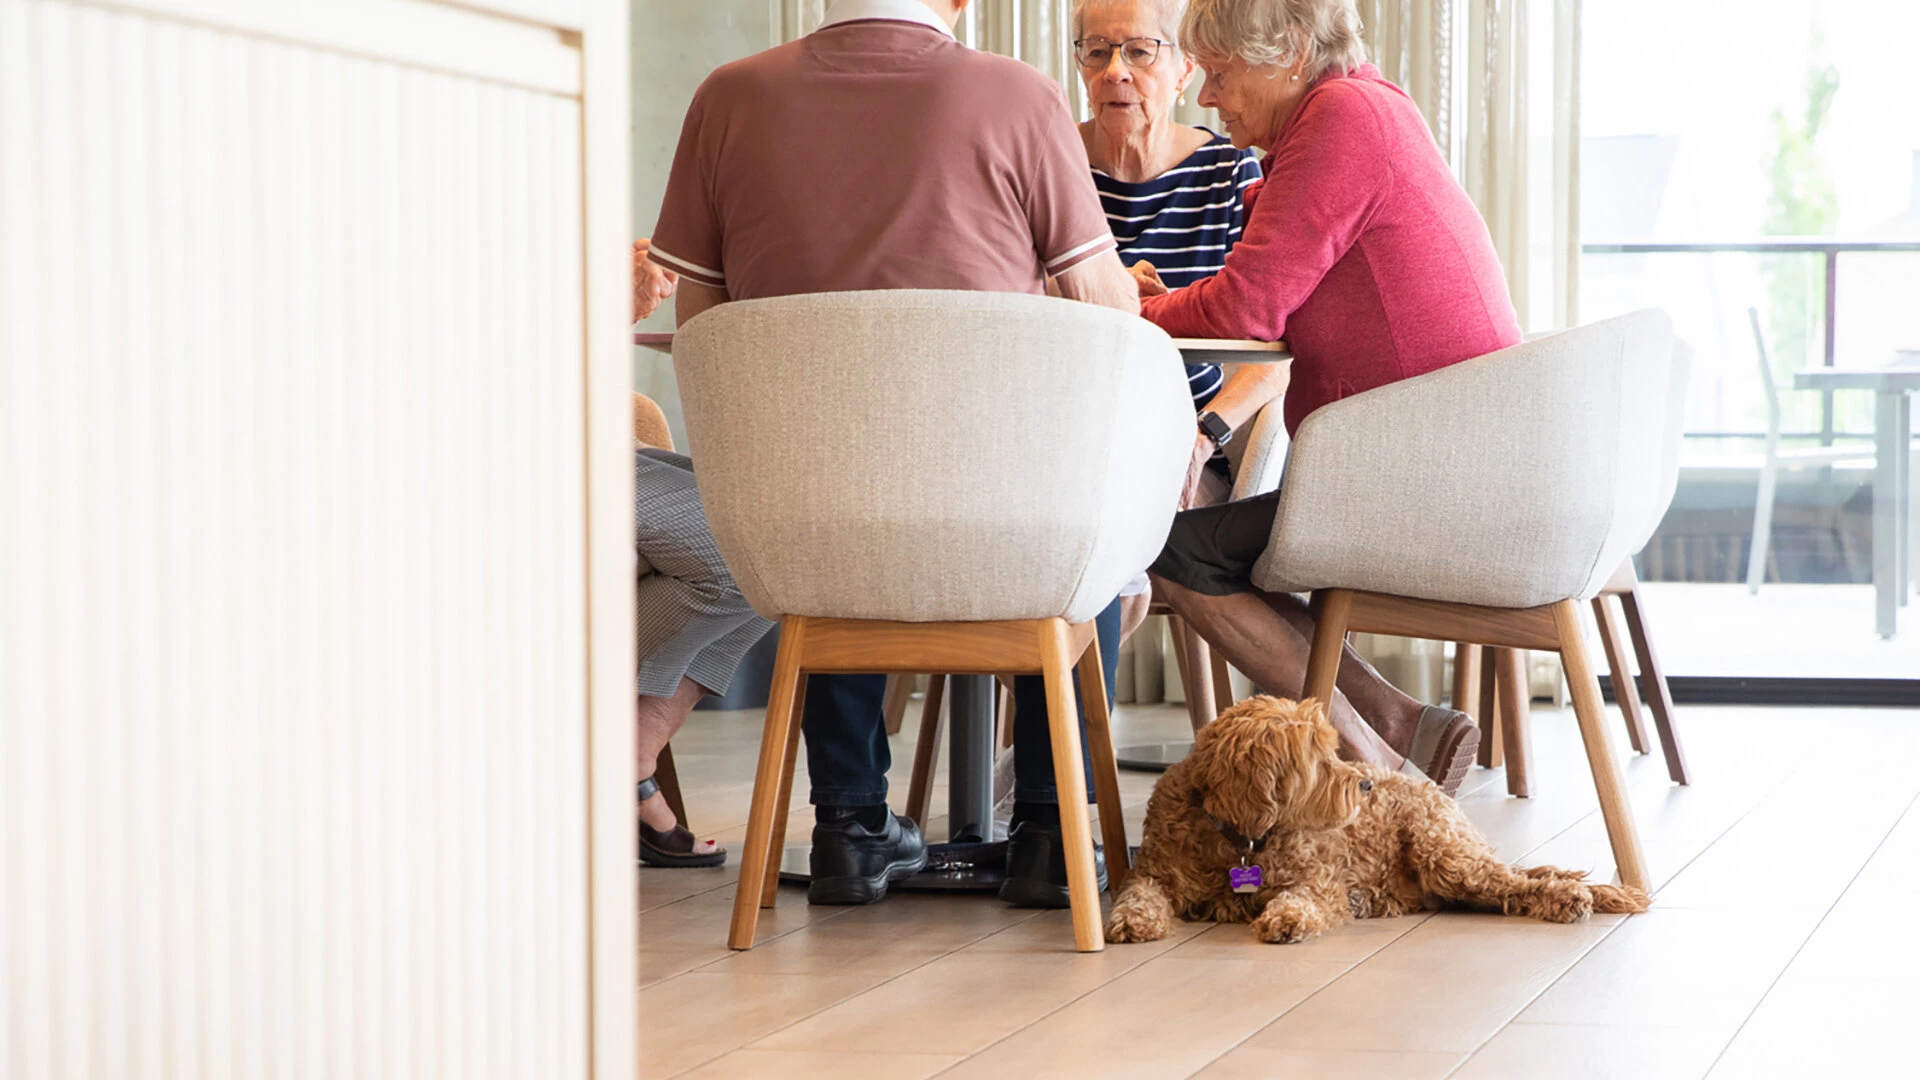 A group of seniors playing a game around a table with a dog sleeping by their feet